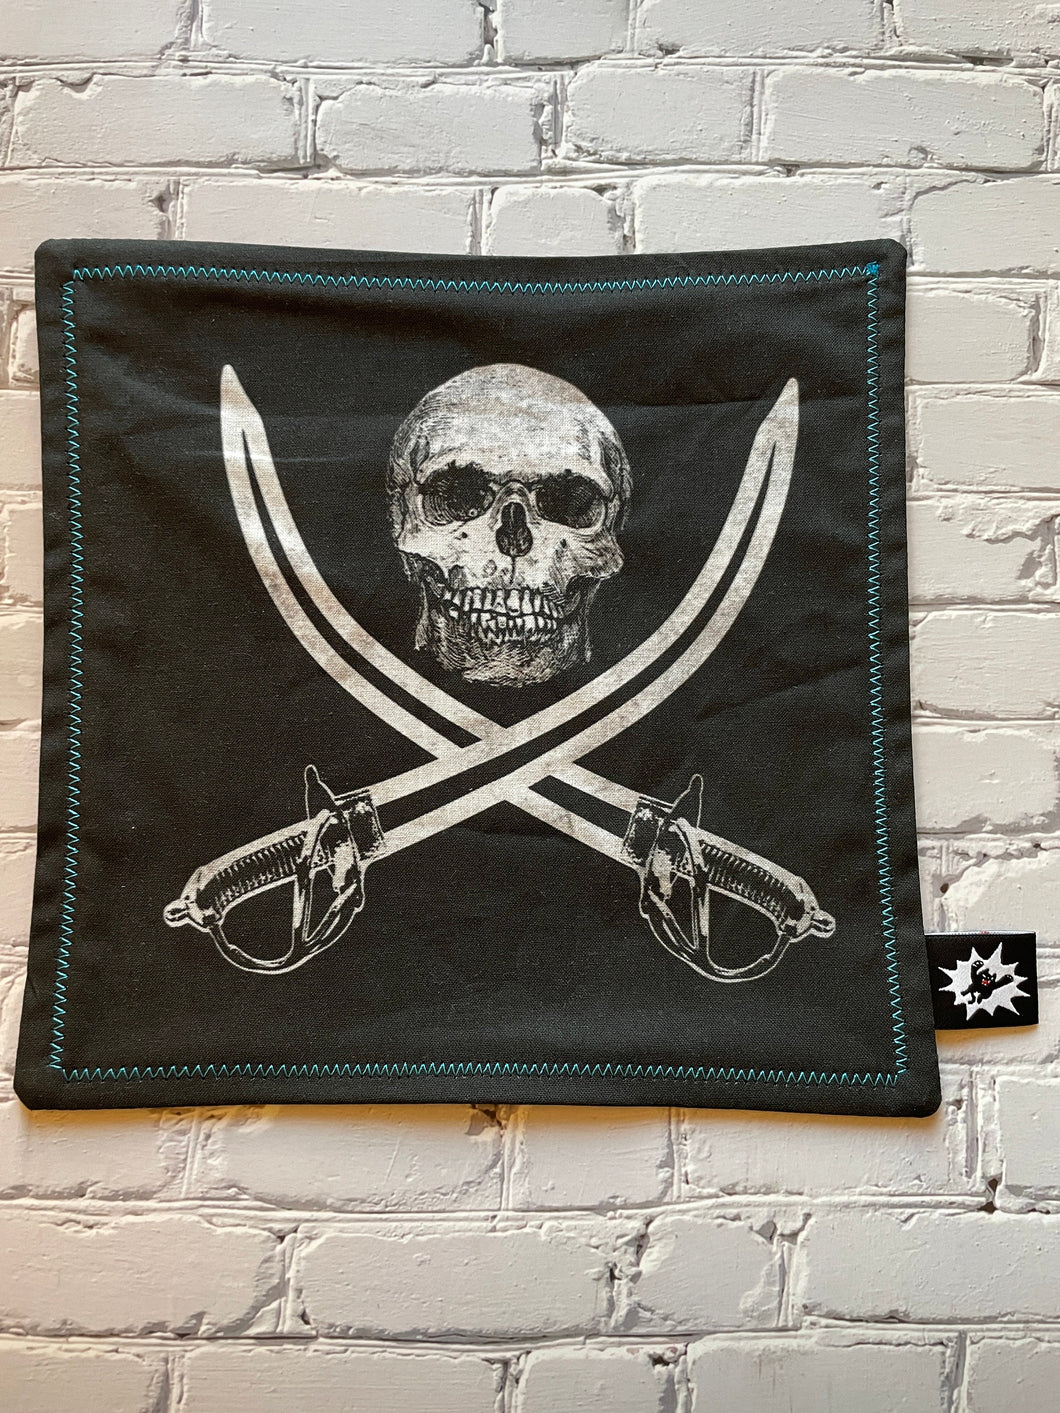 EDC Hank | Handkerchief for Every Day Carry | EDC Gear | Hank For EDC Organizer Pouch | Jolly Roger | Paracord | Pirate Scull and Crossbones